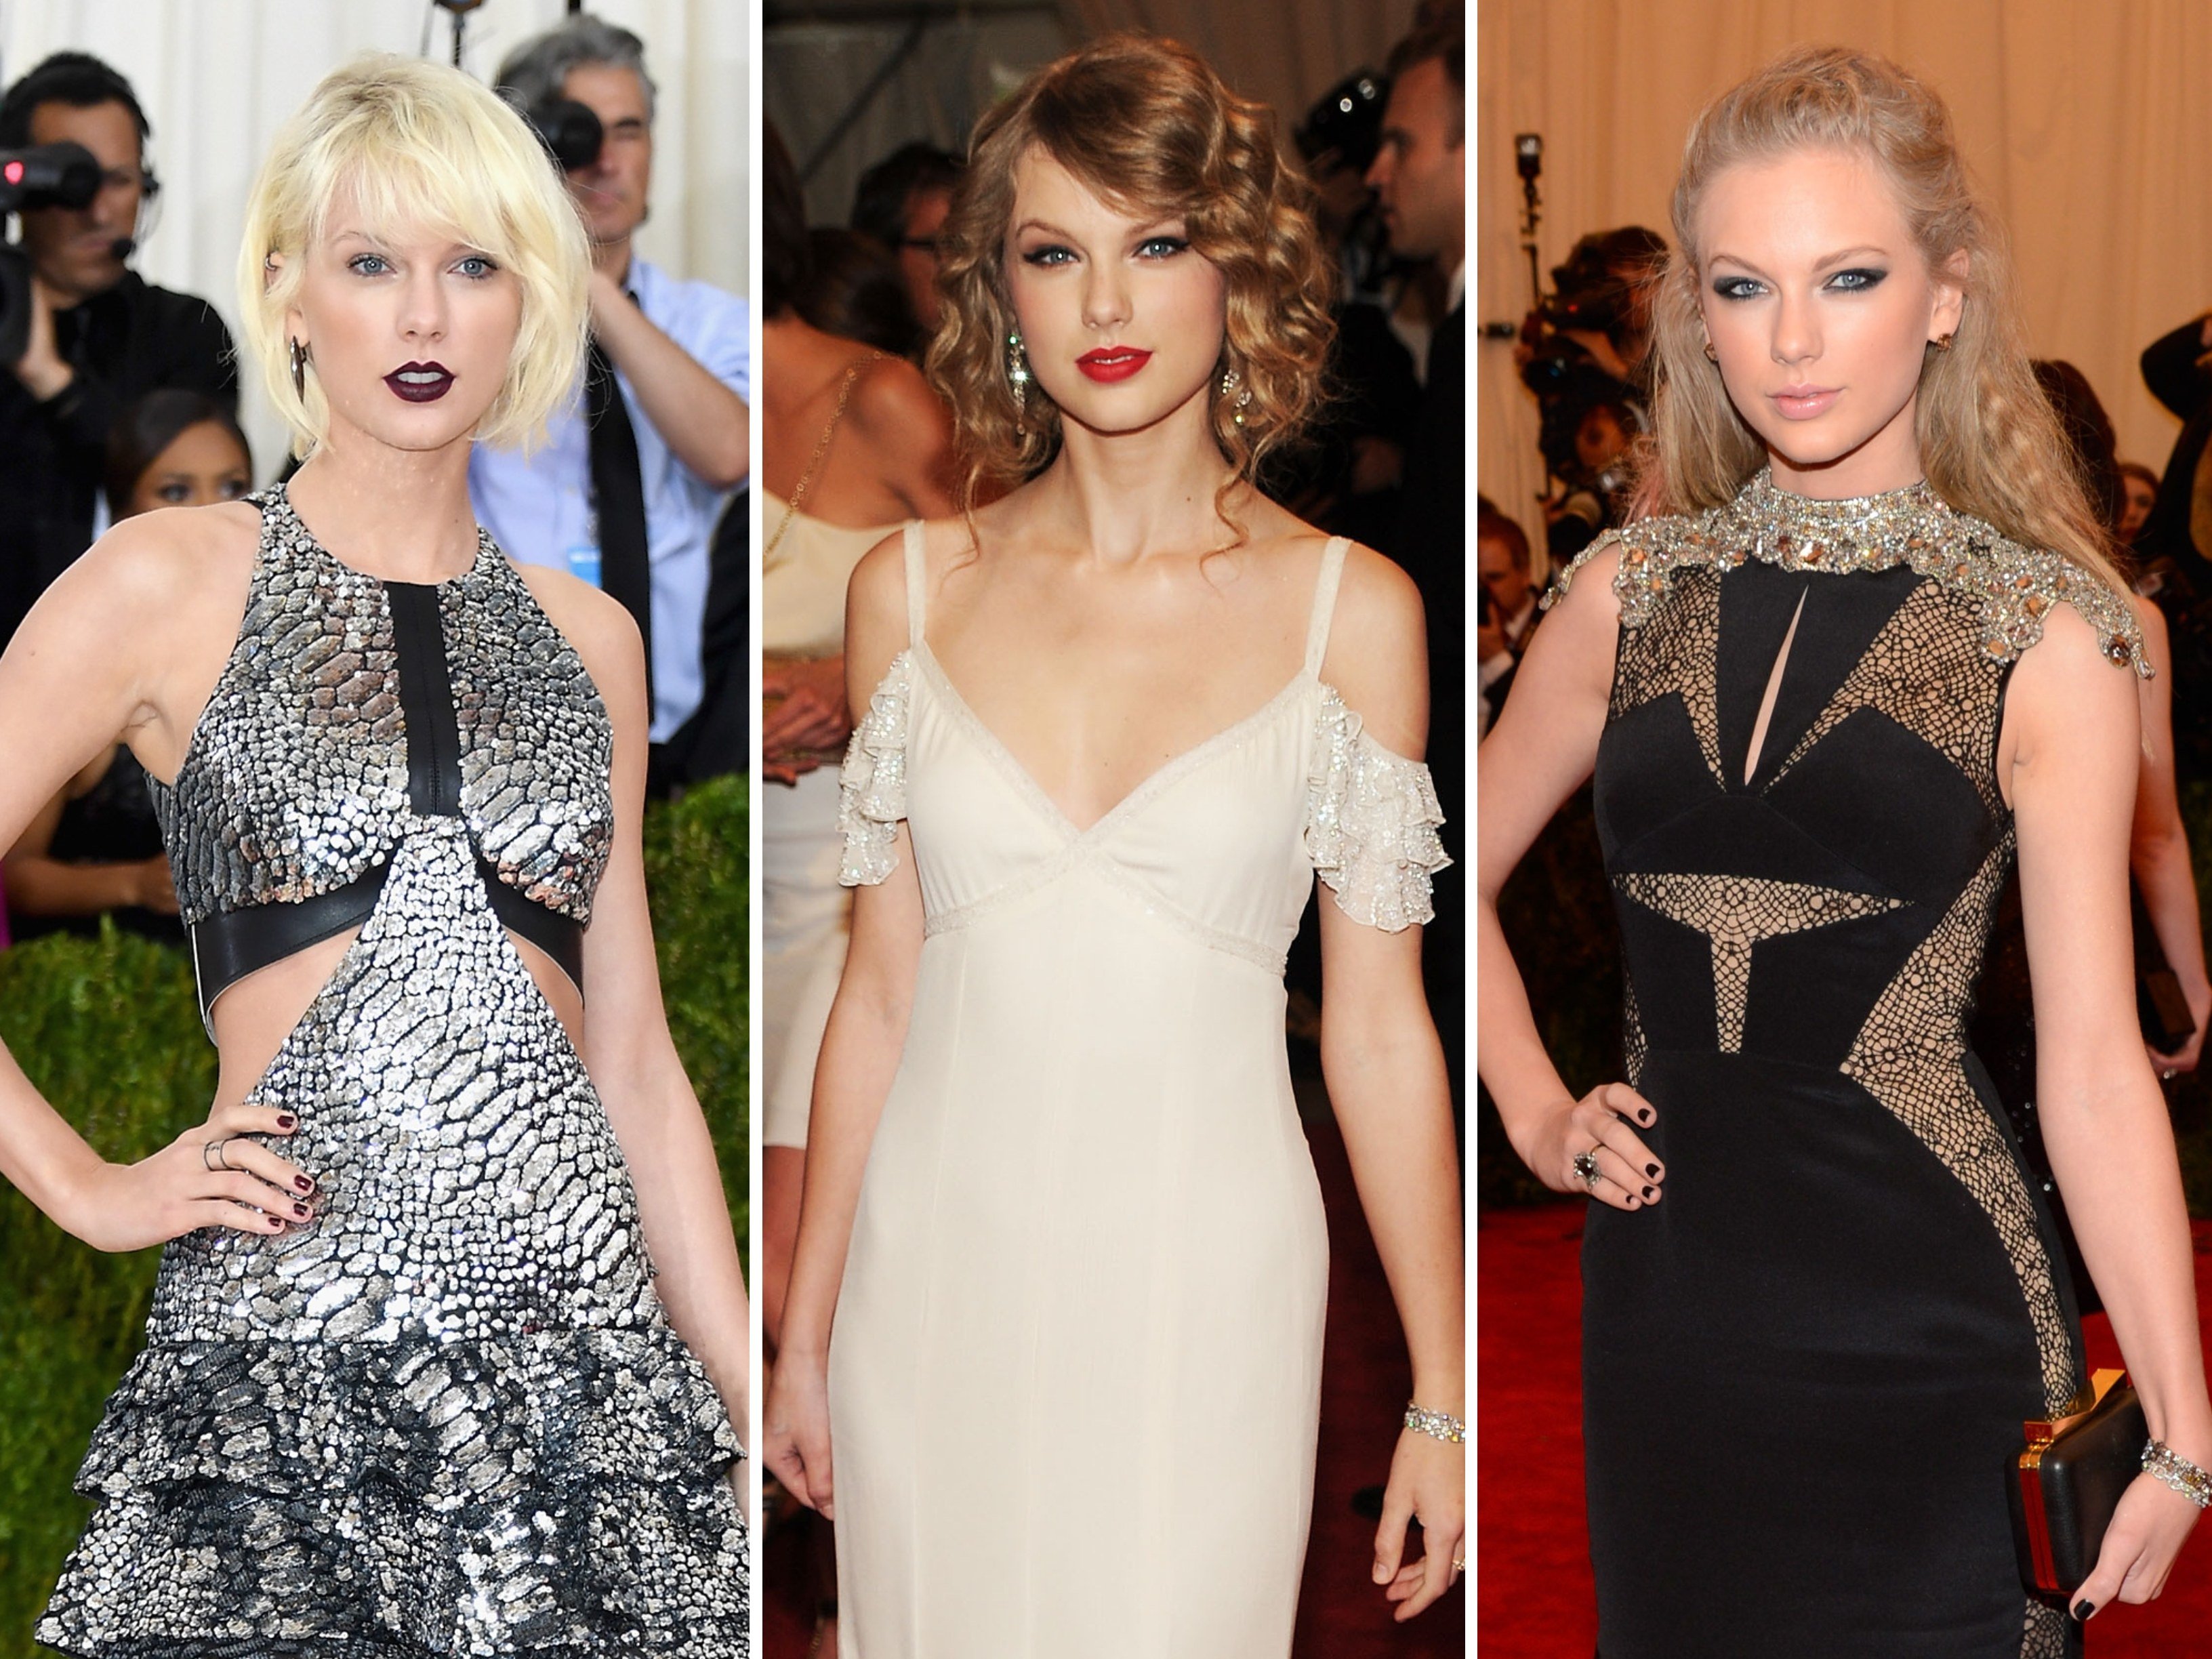 Musician Taylor Swift attends the Met Gala in 2016, 2010 and 2013. Photos: Getty Images